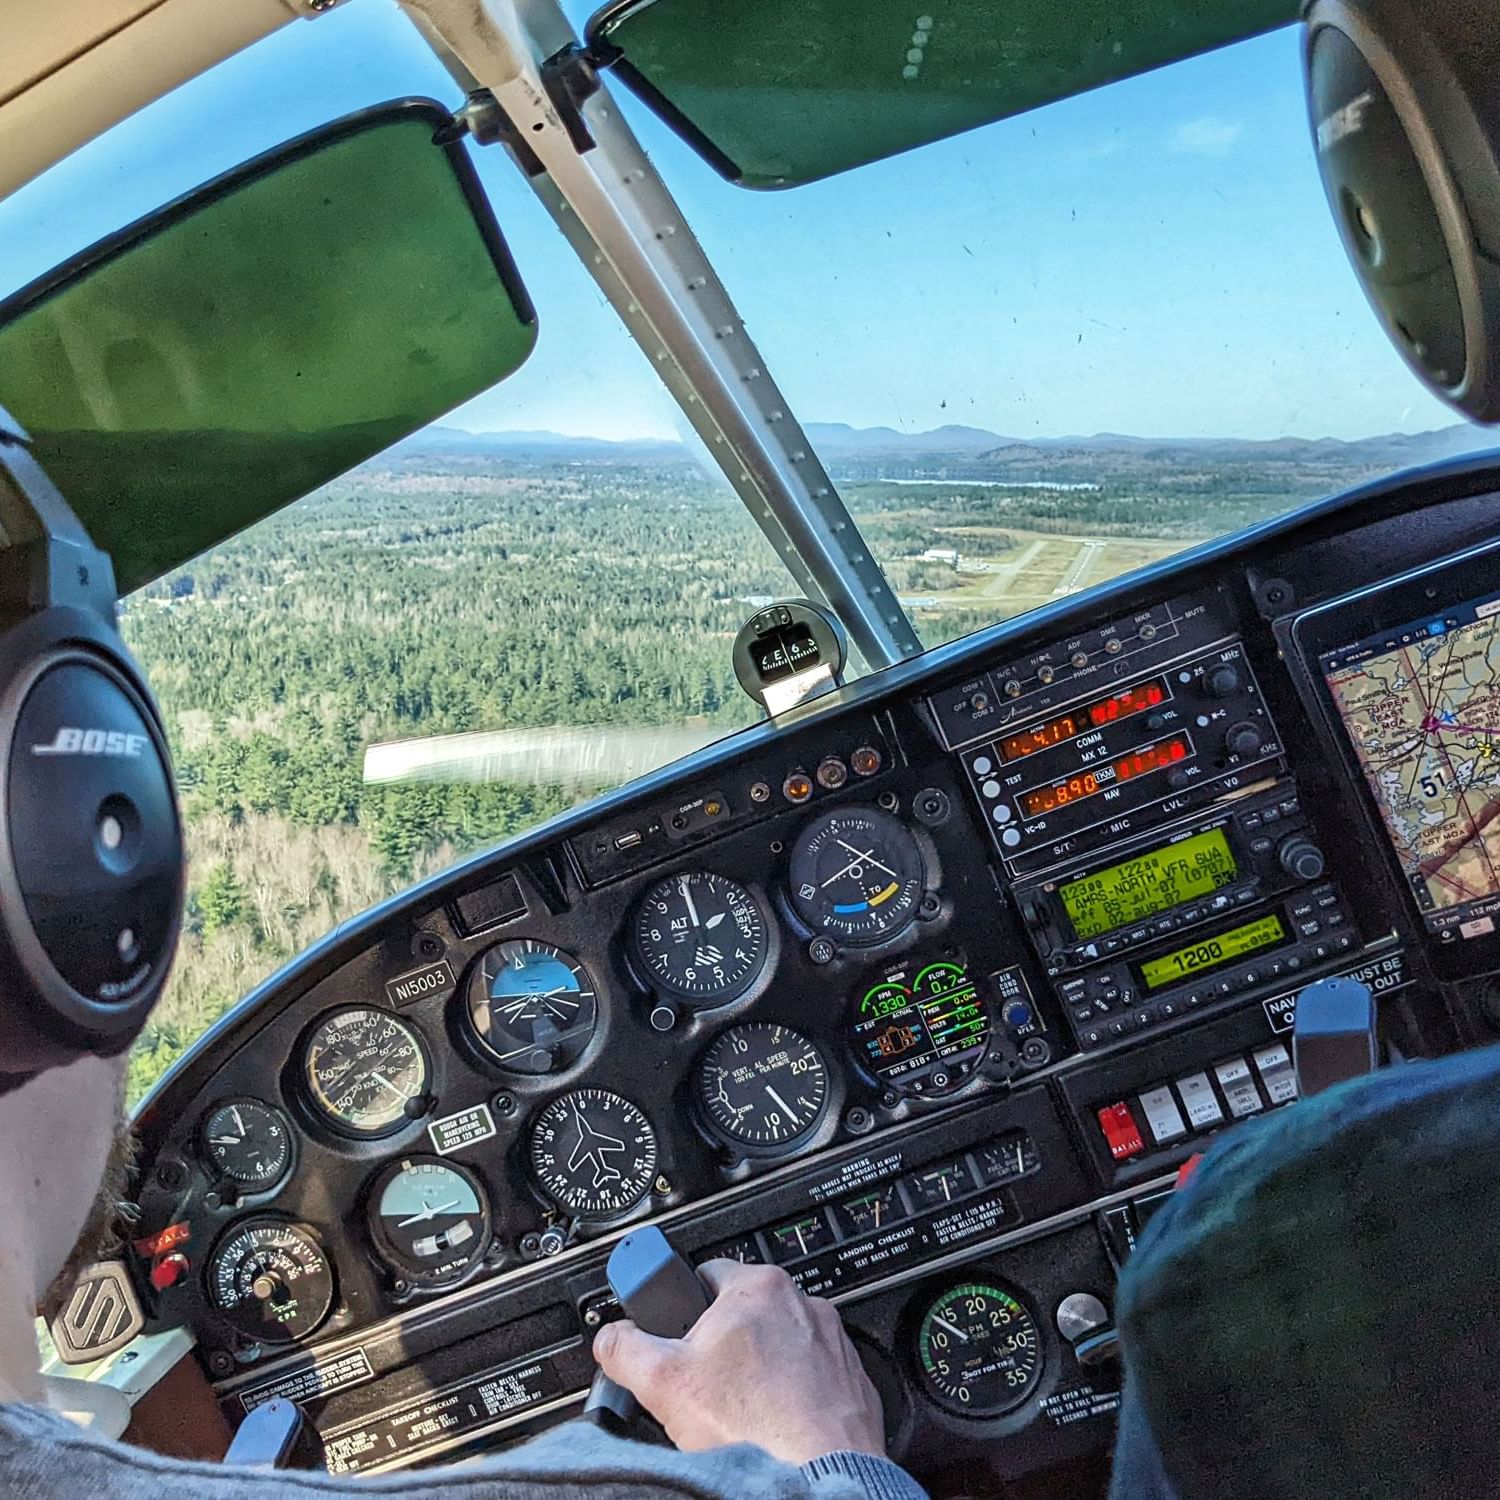 Cockpit view from a small aircraft landing near High Peaks Resort